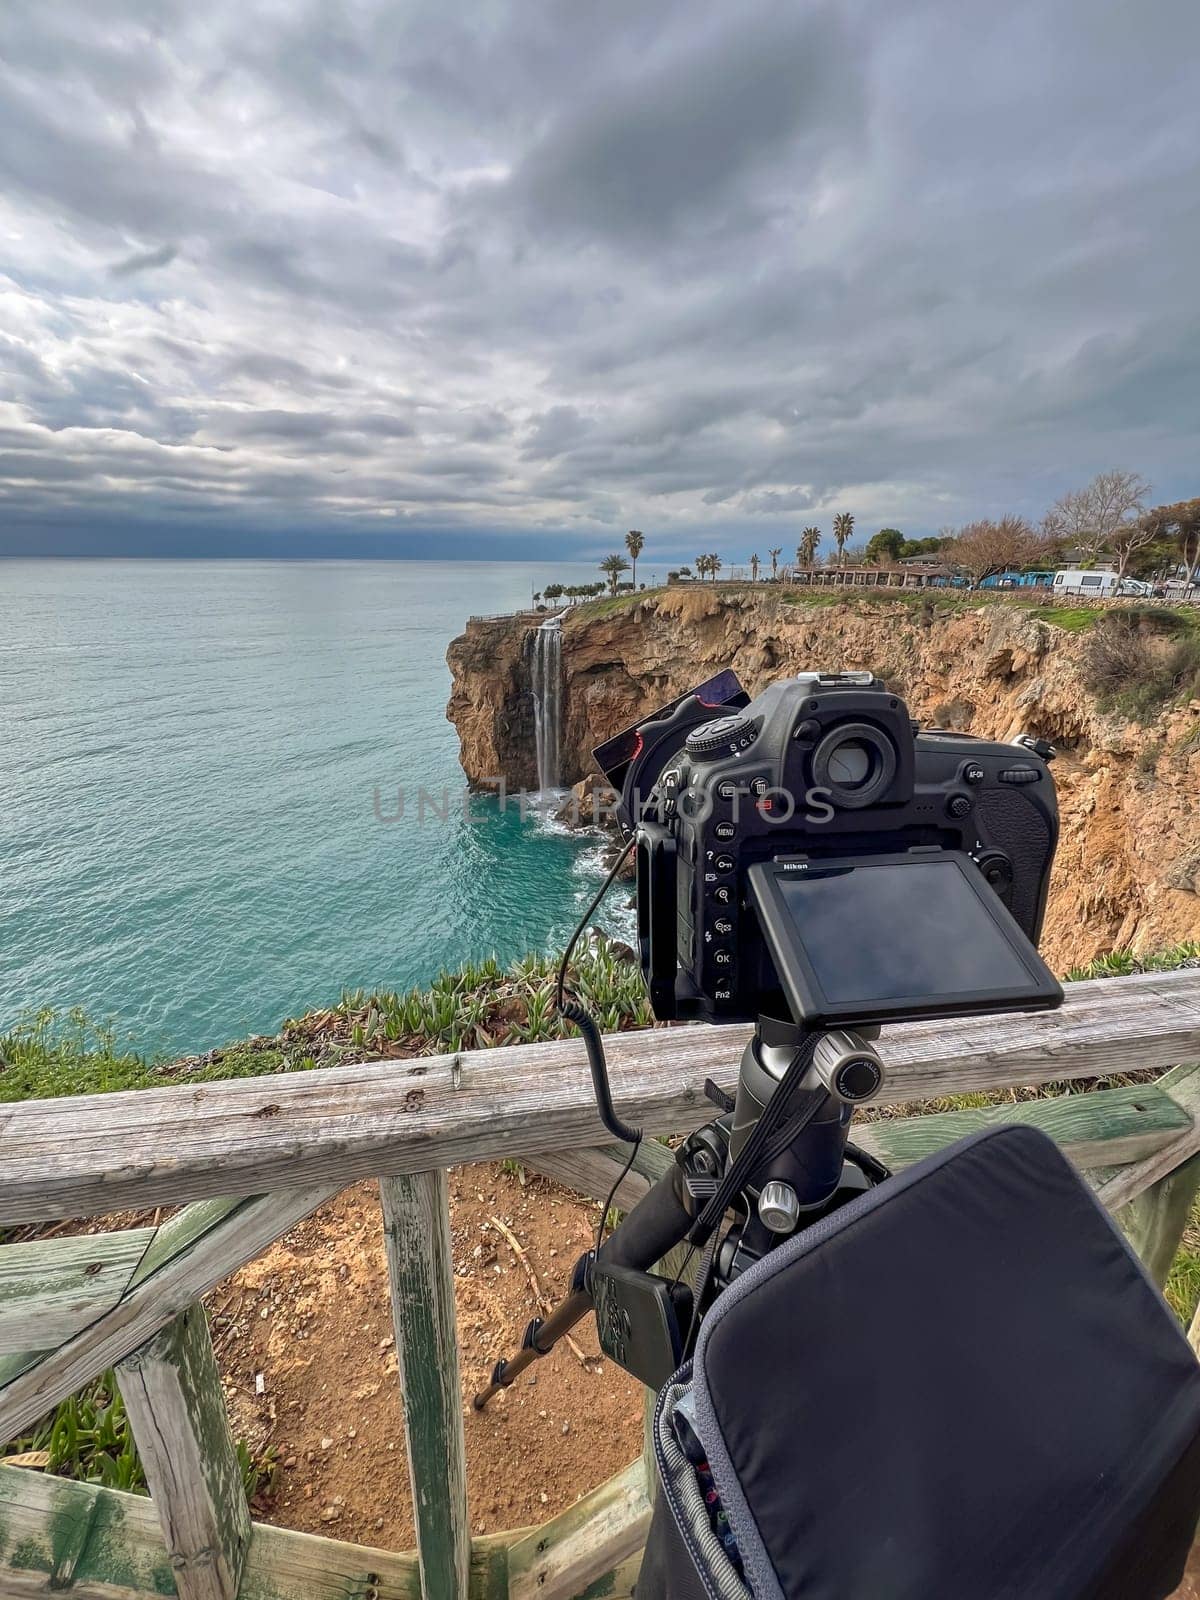 A camera with a circular polarizer and ND filter takes long exposure landscape photos by Sonat